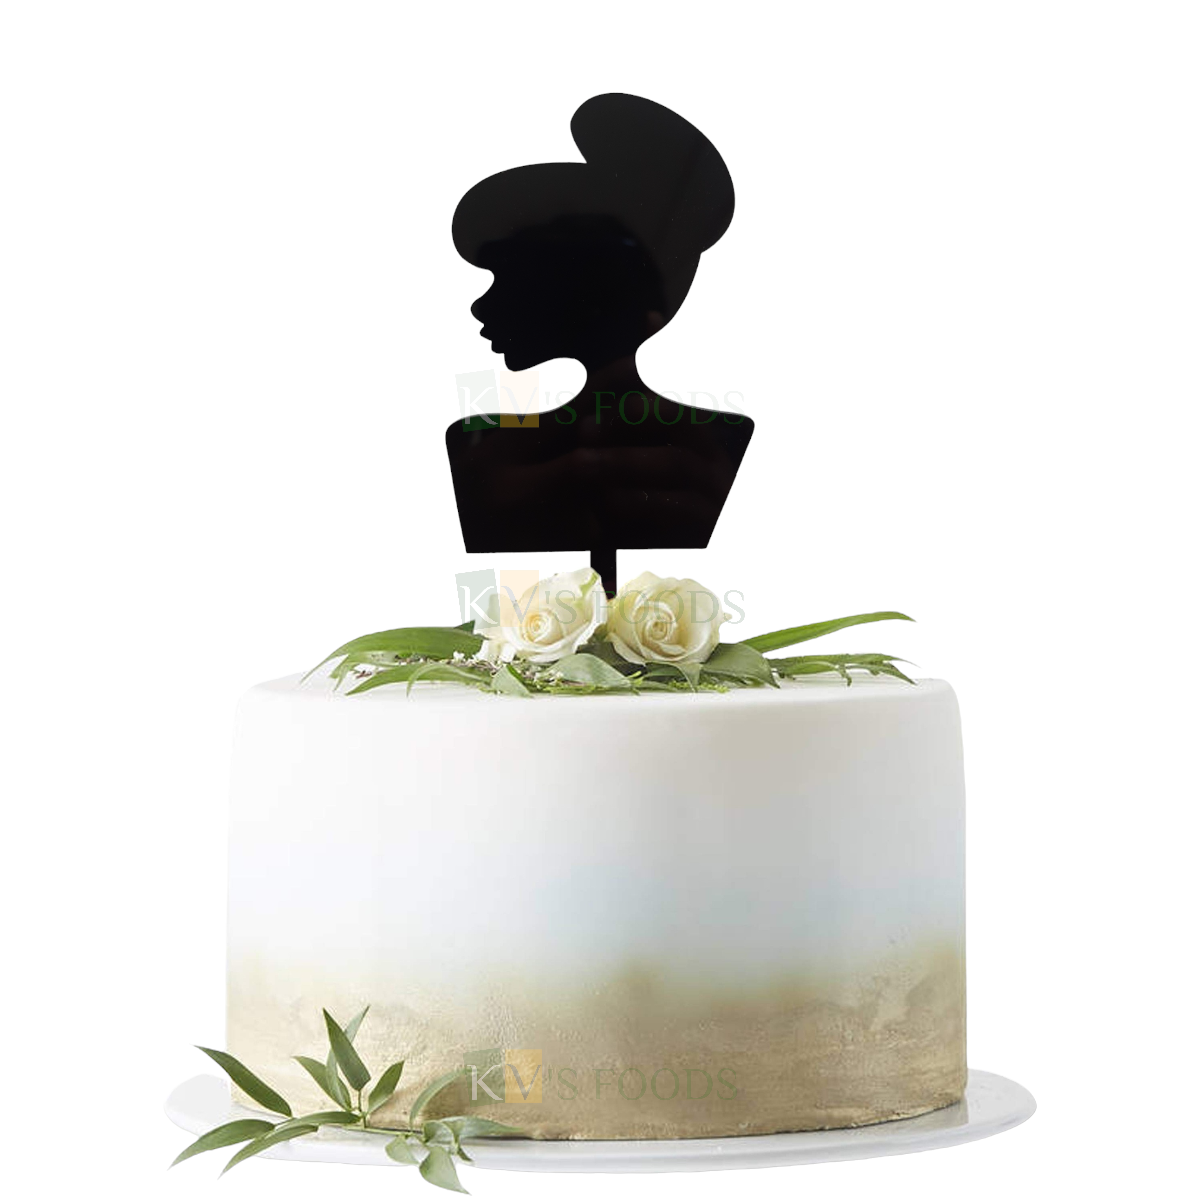 1PC Black Acrylic Girls Face Cake Topper Bride To Be Cake Topper Womans Lady Party Cake Insert, Bridal Shower Party Silhouette Cake Topper DIY Cake Decoration